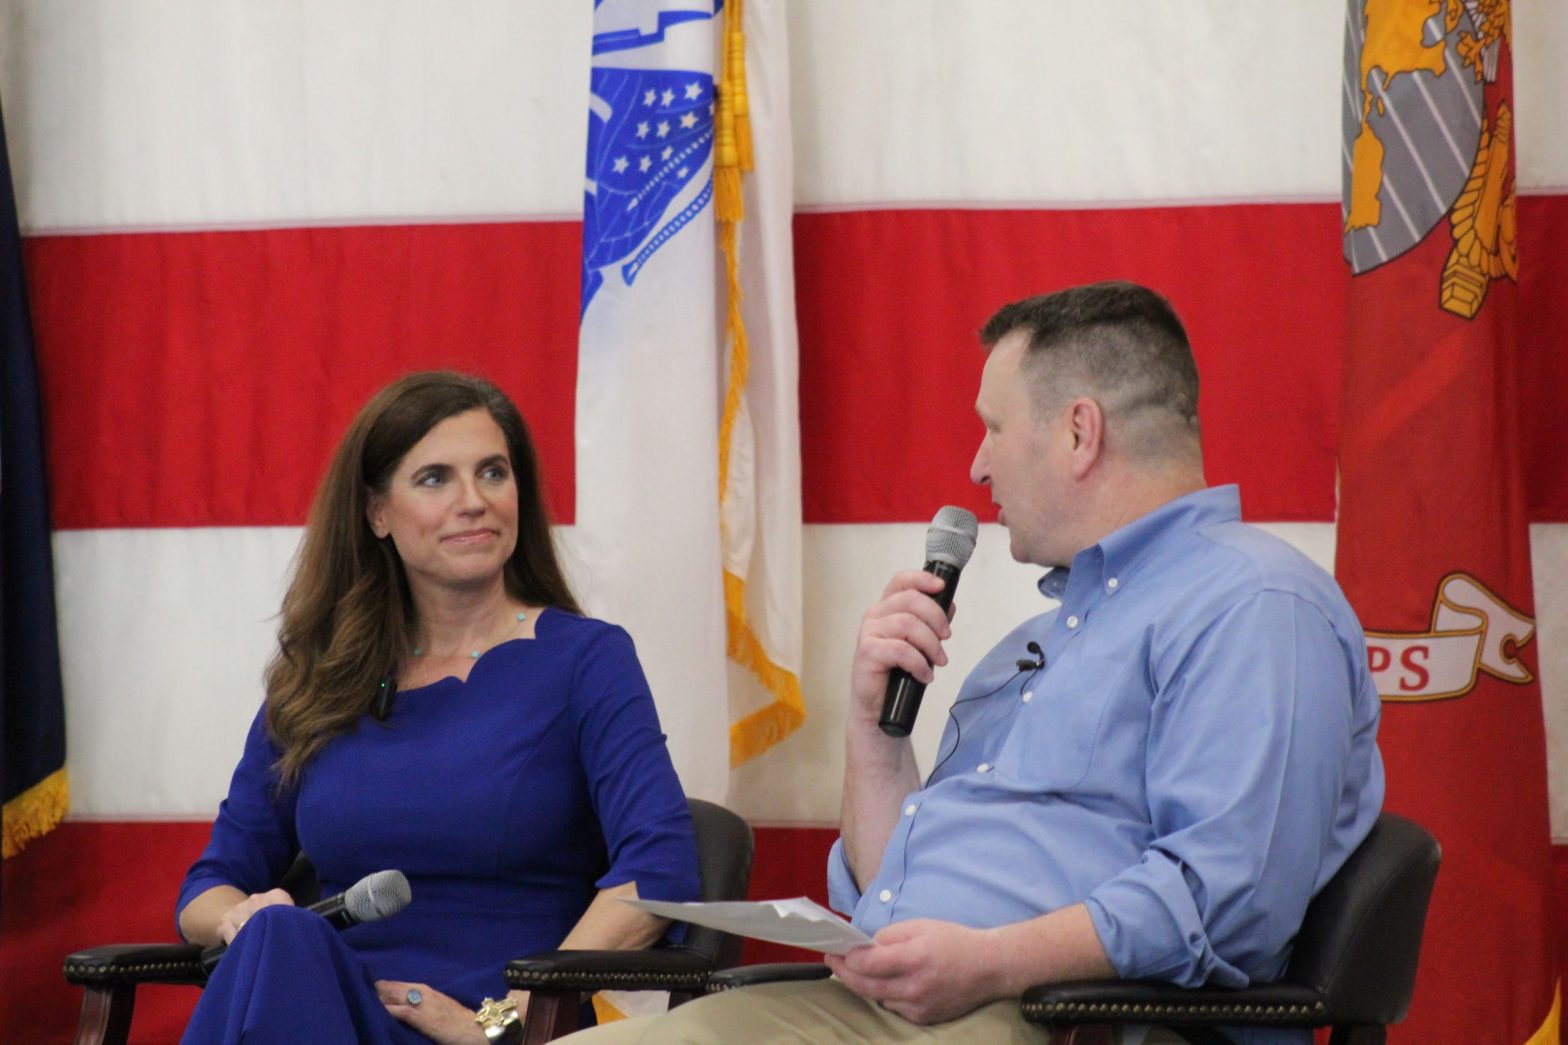 Rooted in South Carolina Soil, Could Mace’s Future Be a US Senate Seat?